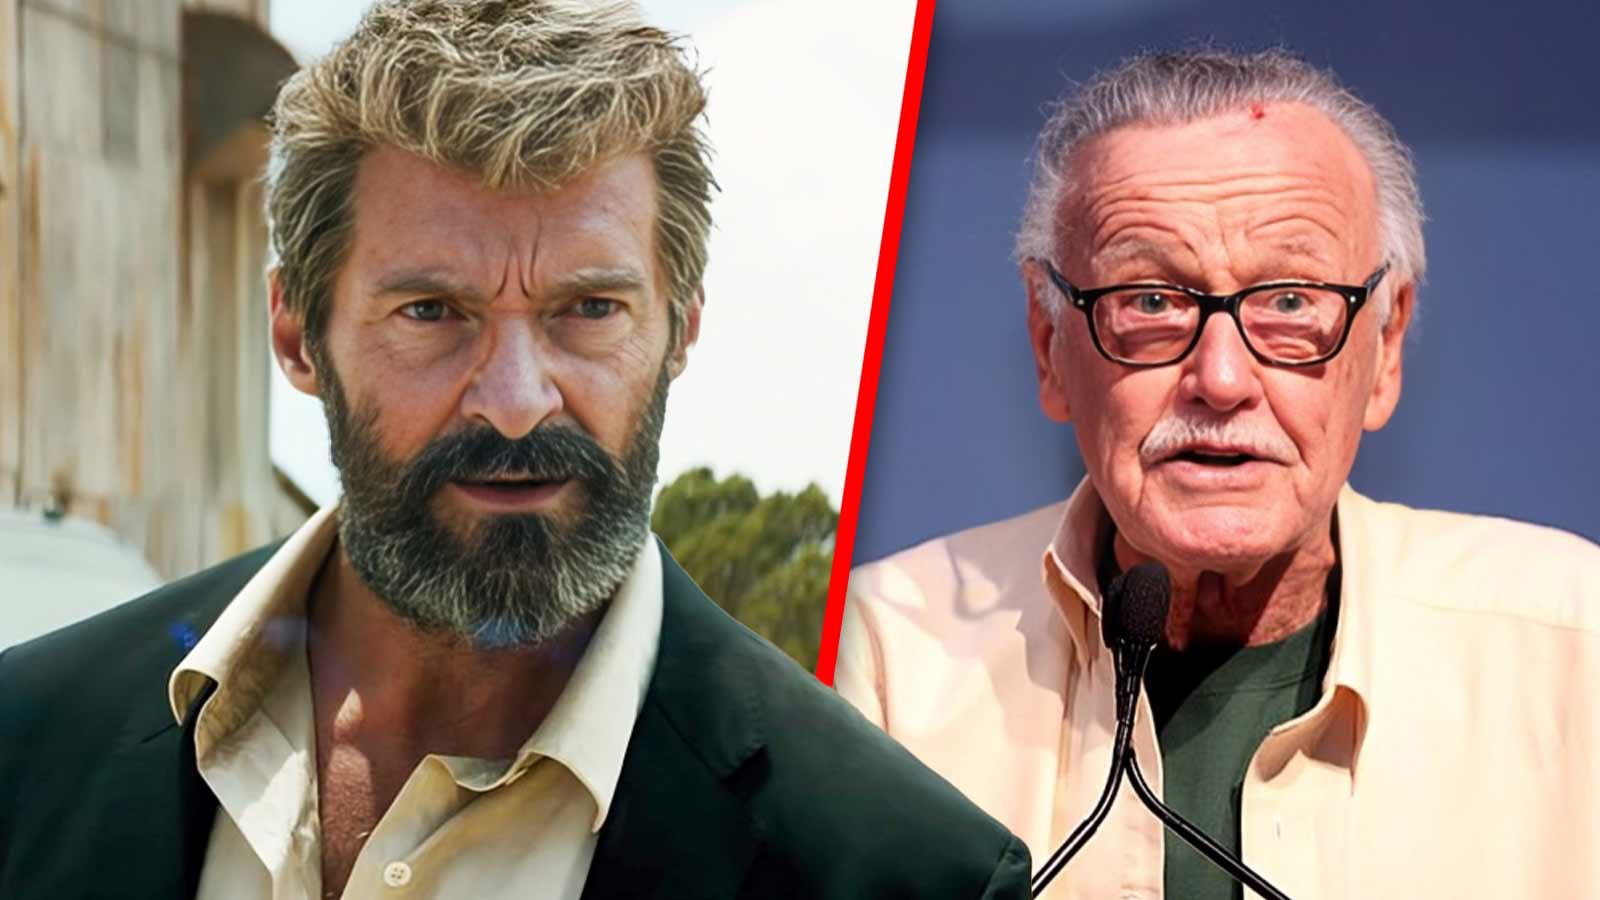 “You are terrific, I’m a big fan of yours”: Video of Hugh Jackman Meeting Stan Lee For the First Time is Enough to Make a Grown Man Cry